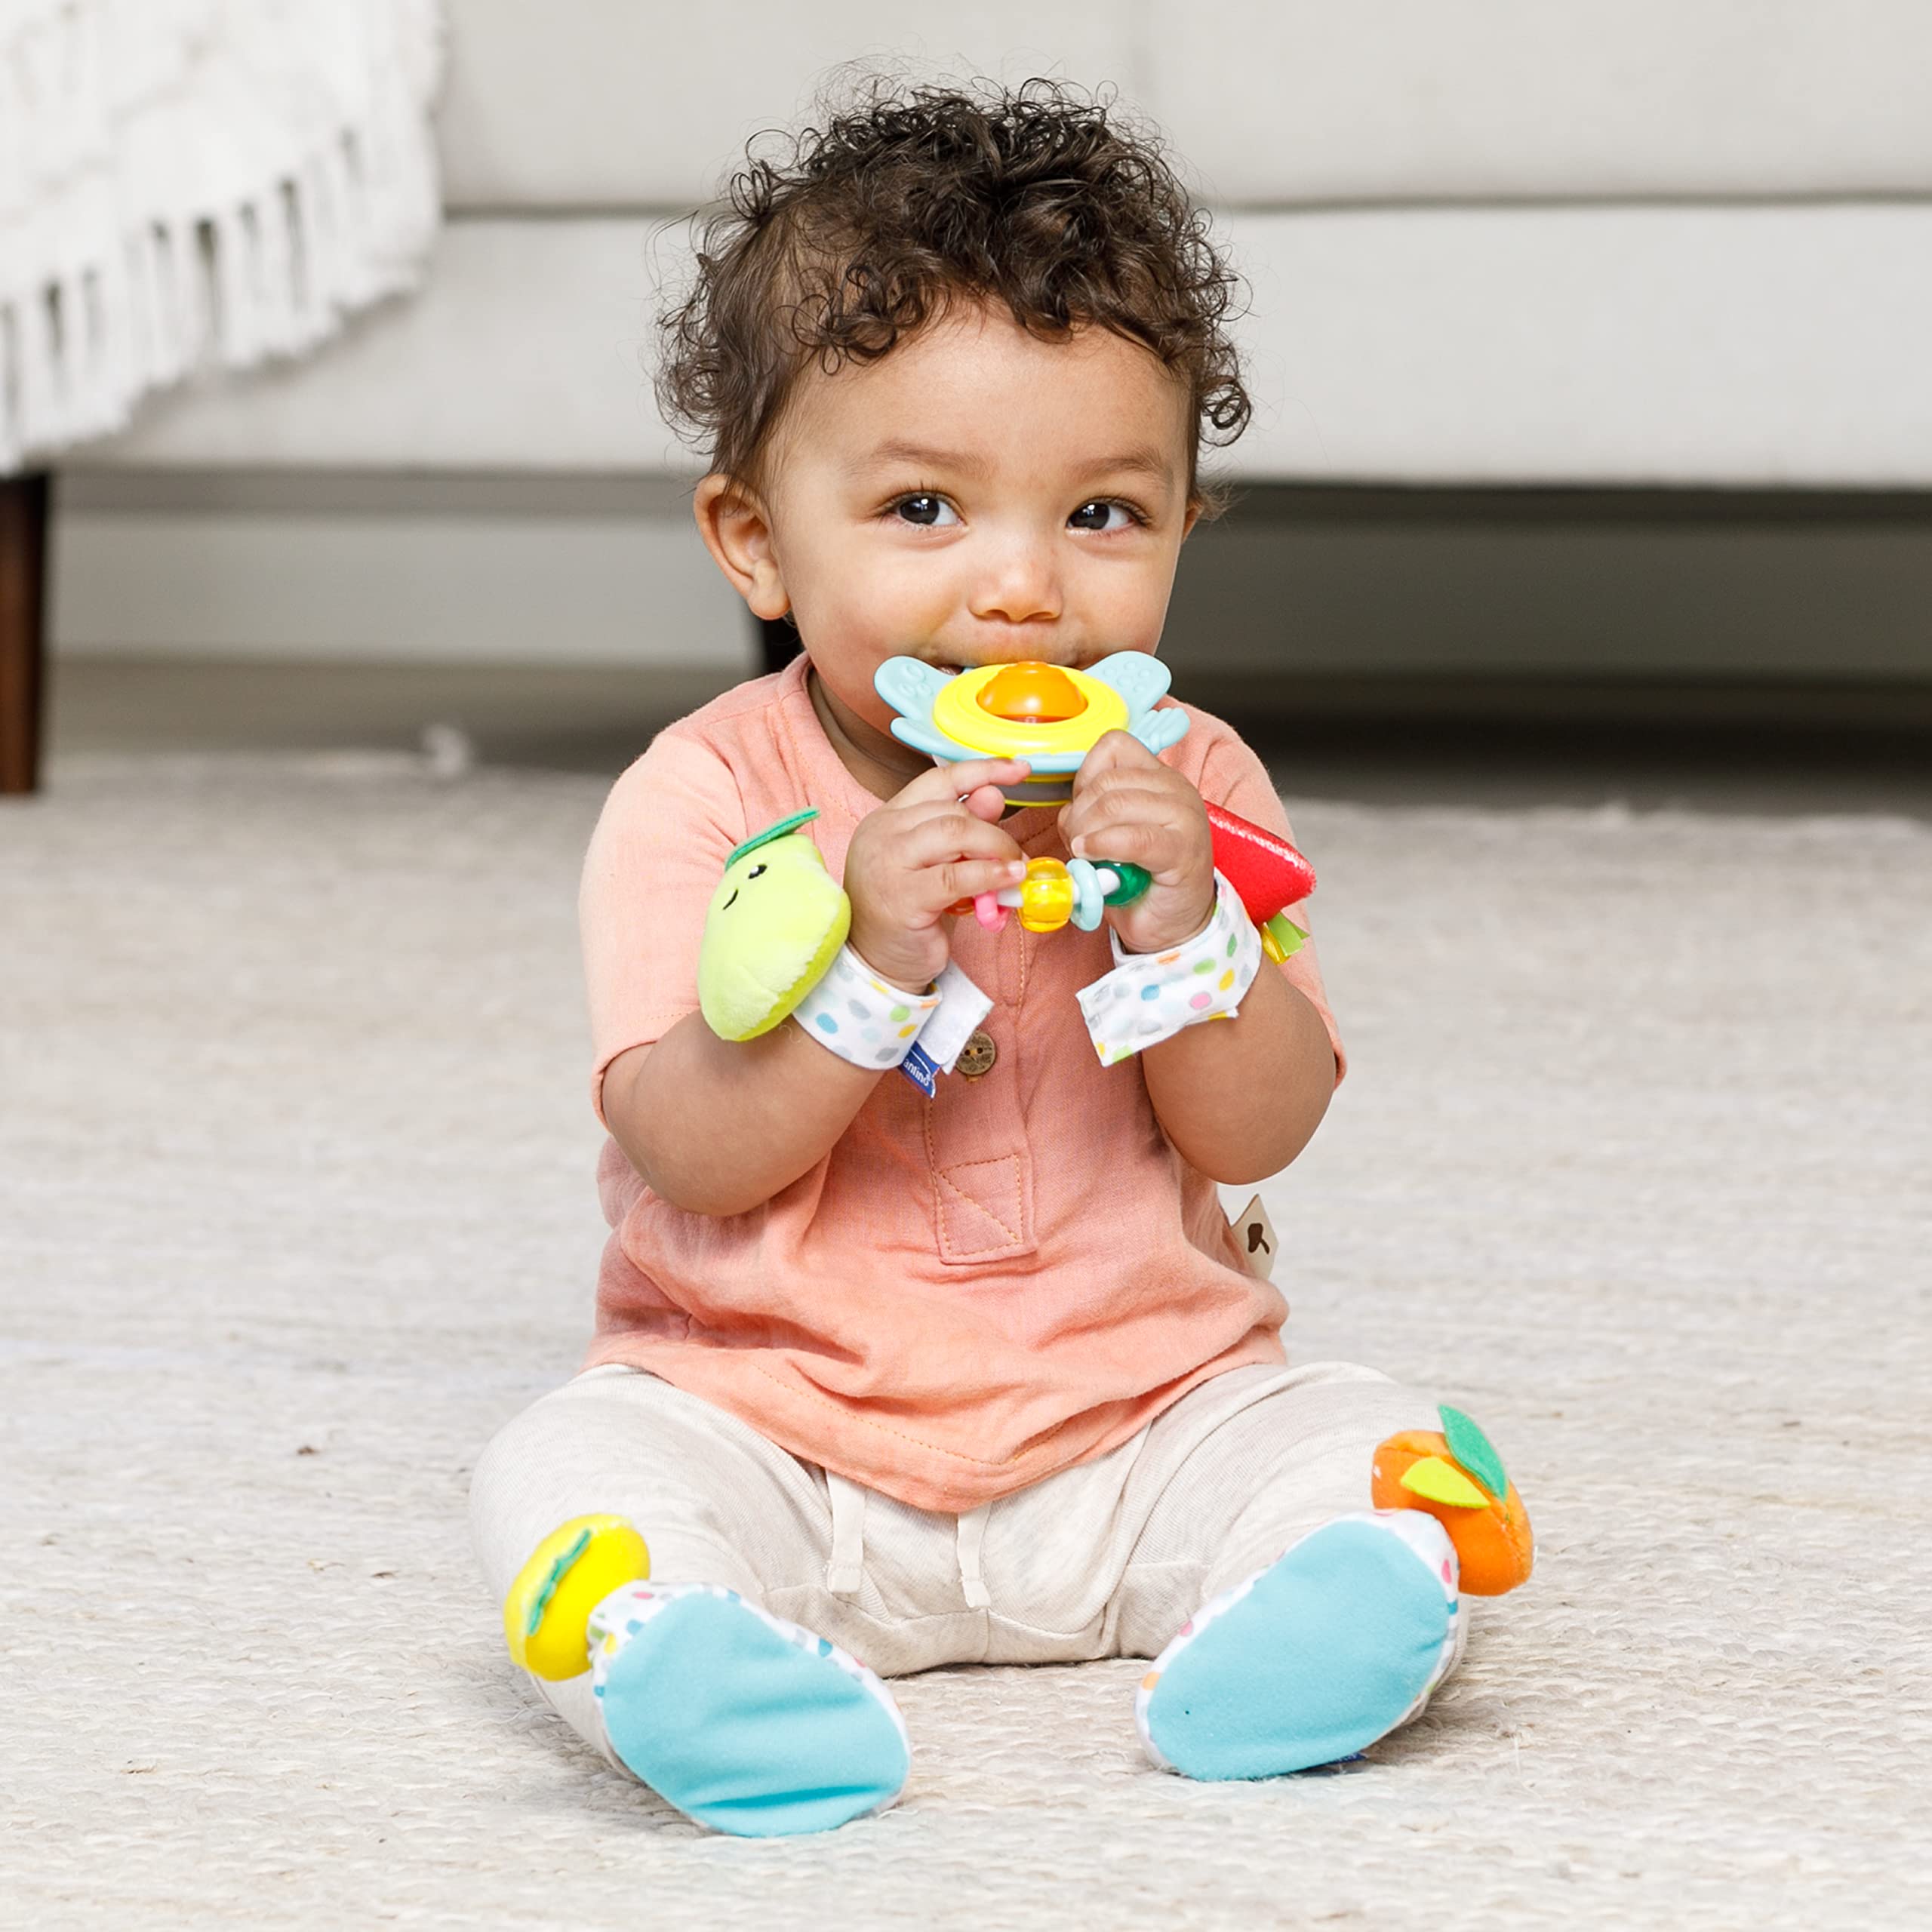 Infantino Baby's 1st Rattle Bundle Gift Set, Wrist Rattles, Foot Rattles, Spin & Teethe Gummy Rattle, Multicolor Fruit-Themed, 3-Piece Value Set for Babies 0M+